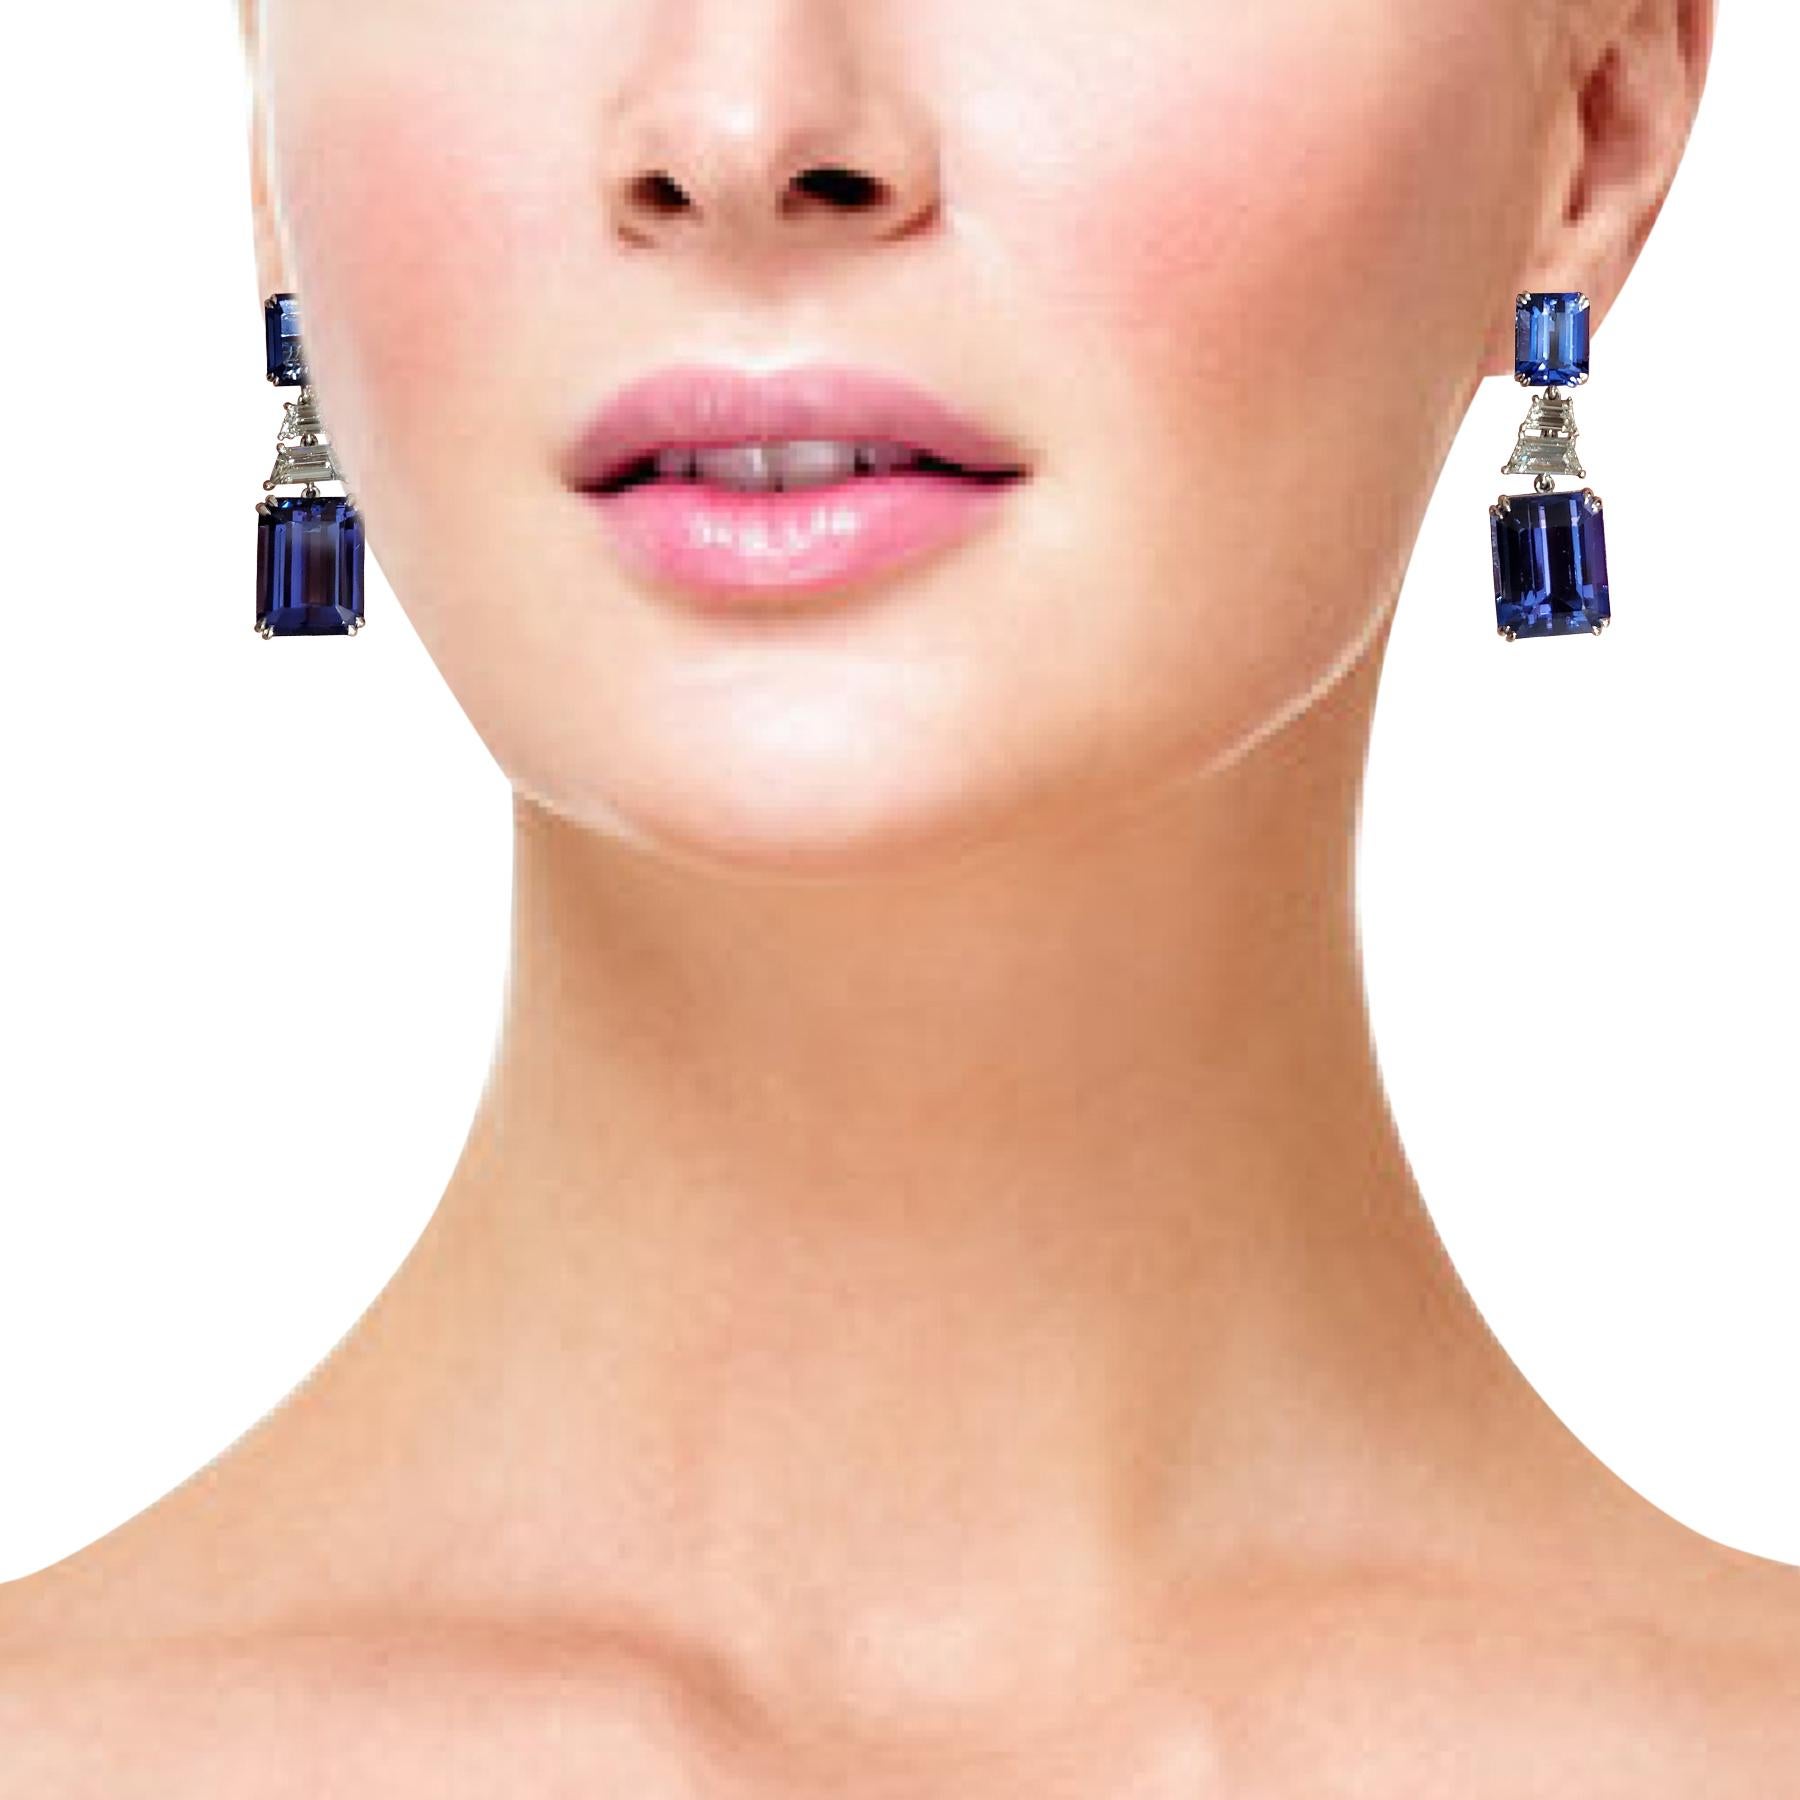 30.32 Carat Natural Tanzanite and White Diamond Gold Dangle Earrings:

A gorgeous pair of earrings, it features four natural emerald-cut tanzanites weighing 30.32 carat embellished by white trapezoid-cut diamonds weighing 1.74 carat. The tanzanites